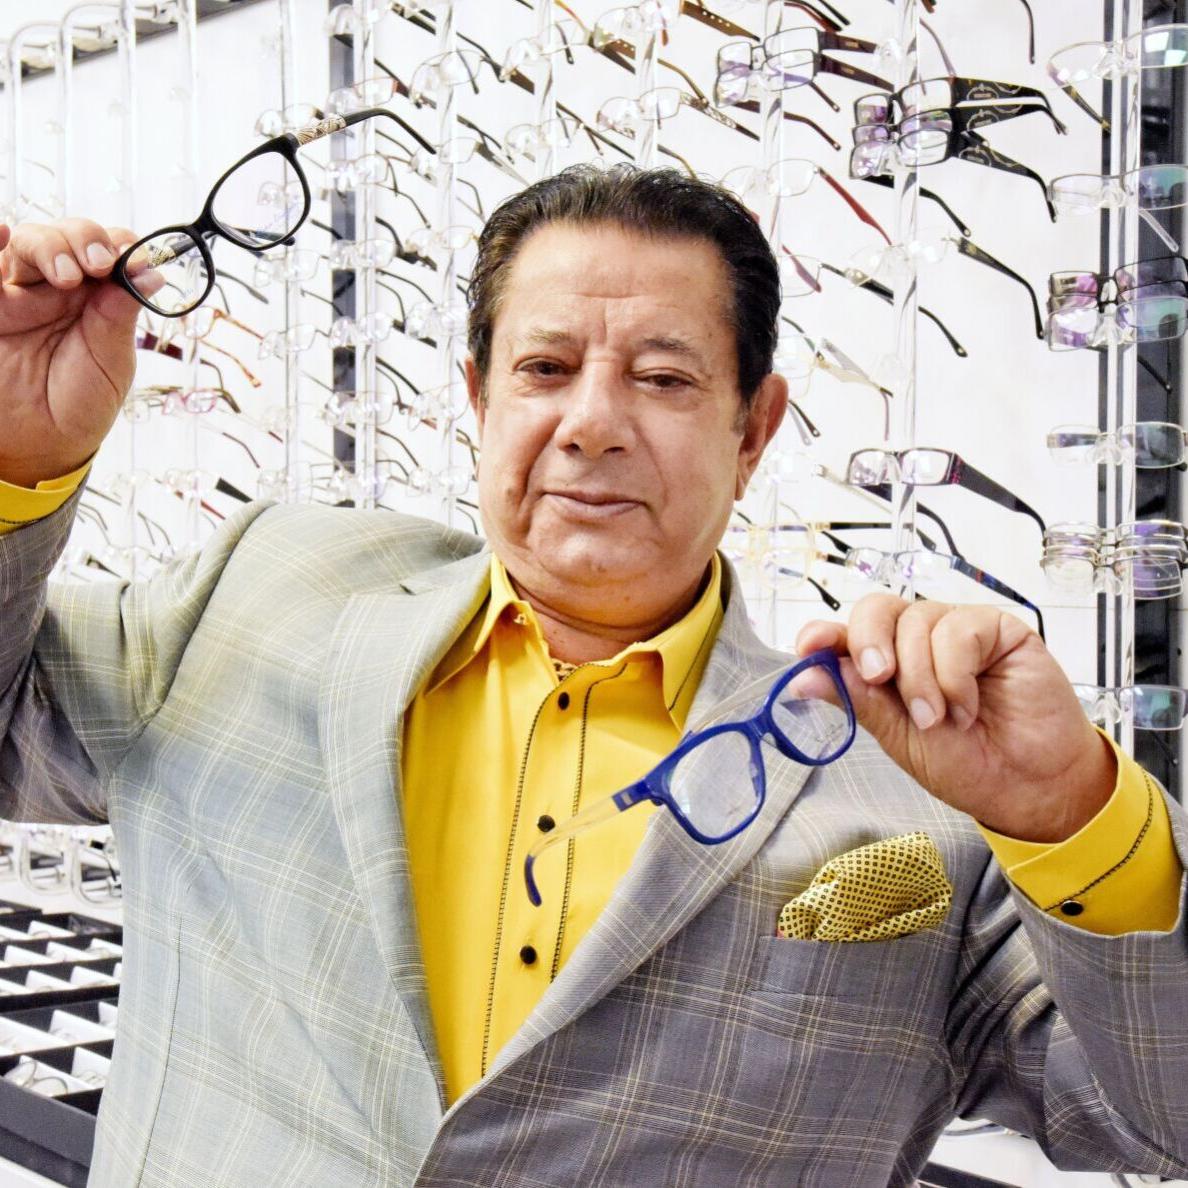 The rags to riches story of Hakim Optical founder Karim Hakimi